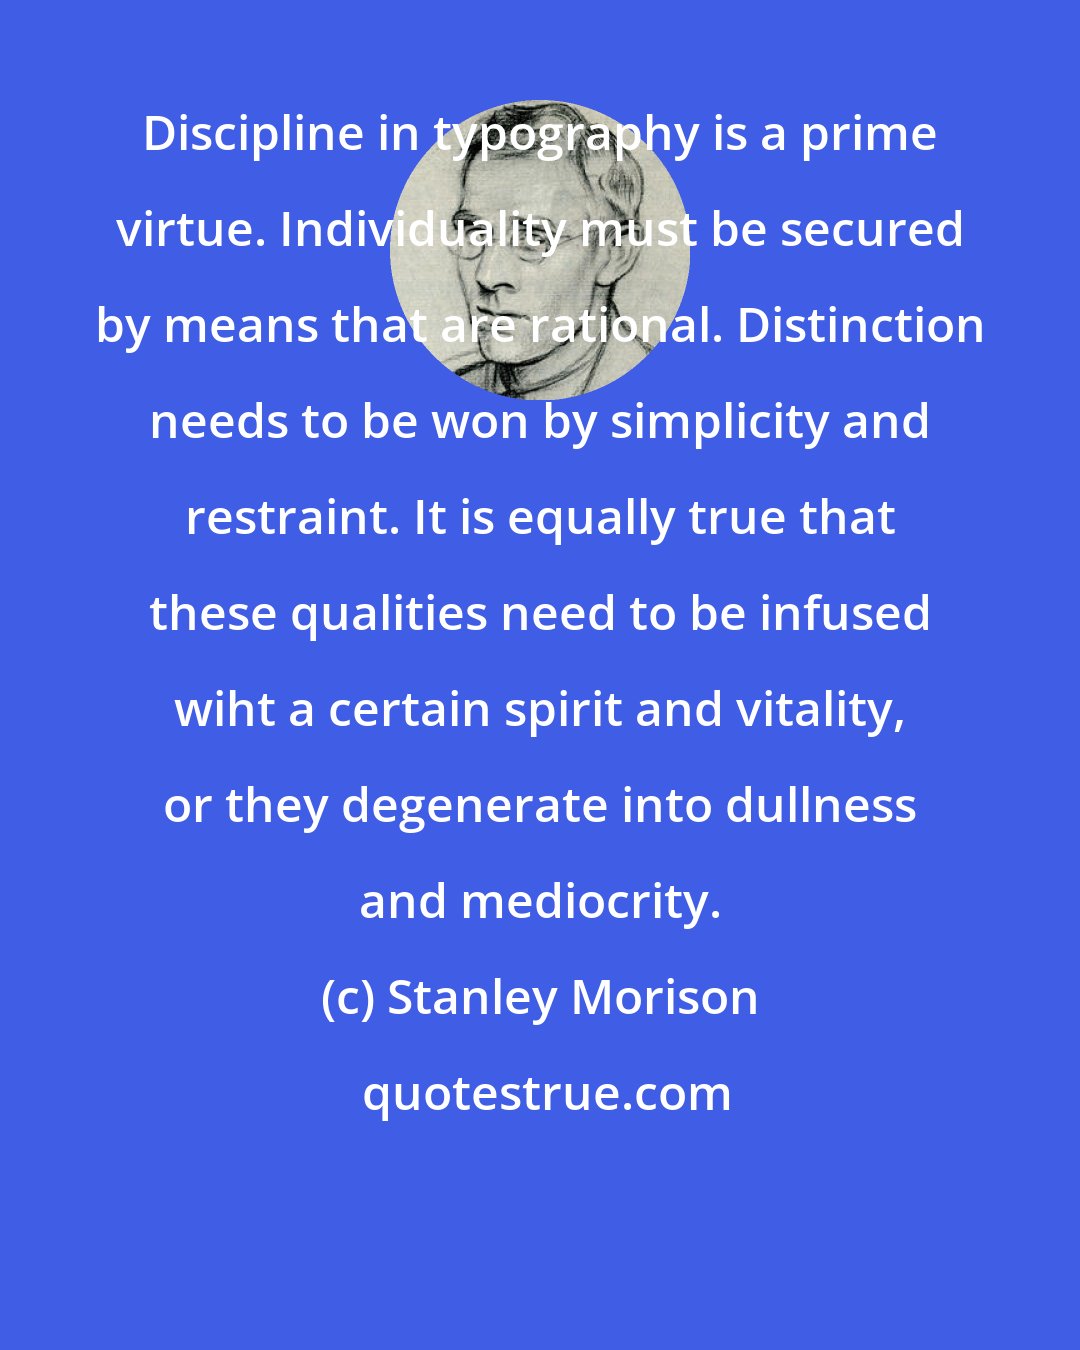 Stanley Morison: Discipline in typography is a prime virtue. Individuality must be secured by means that are rational. Distinction needs to be won by simplicity and restraint. It is equally true that these qualities need to be infused wiht a certain spirit and vitality, or they degenerate into dullness and mediocrity.